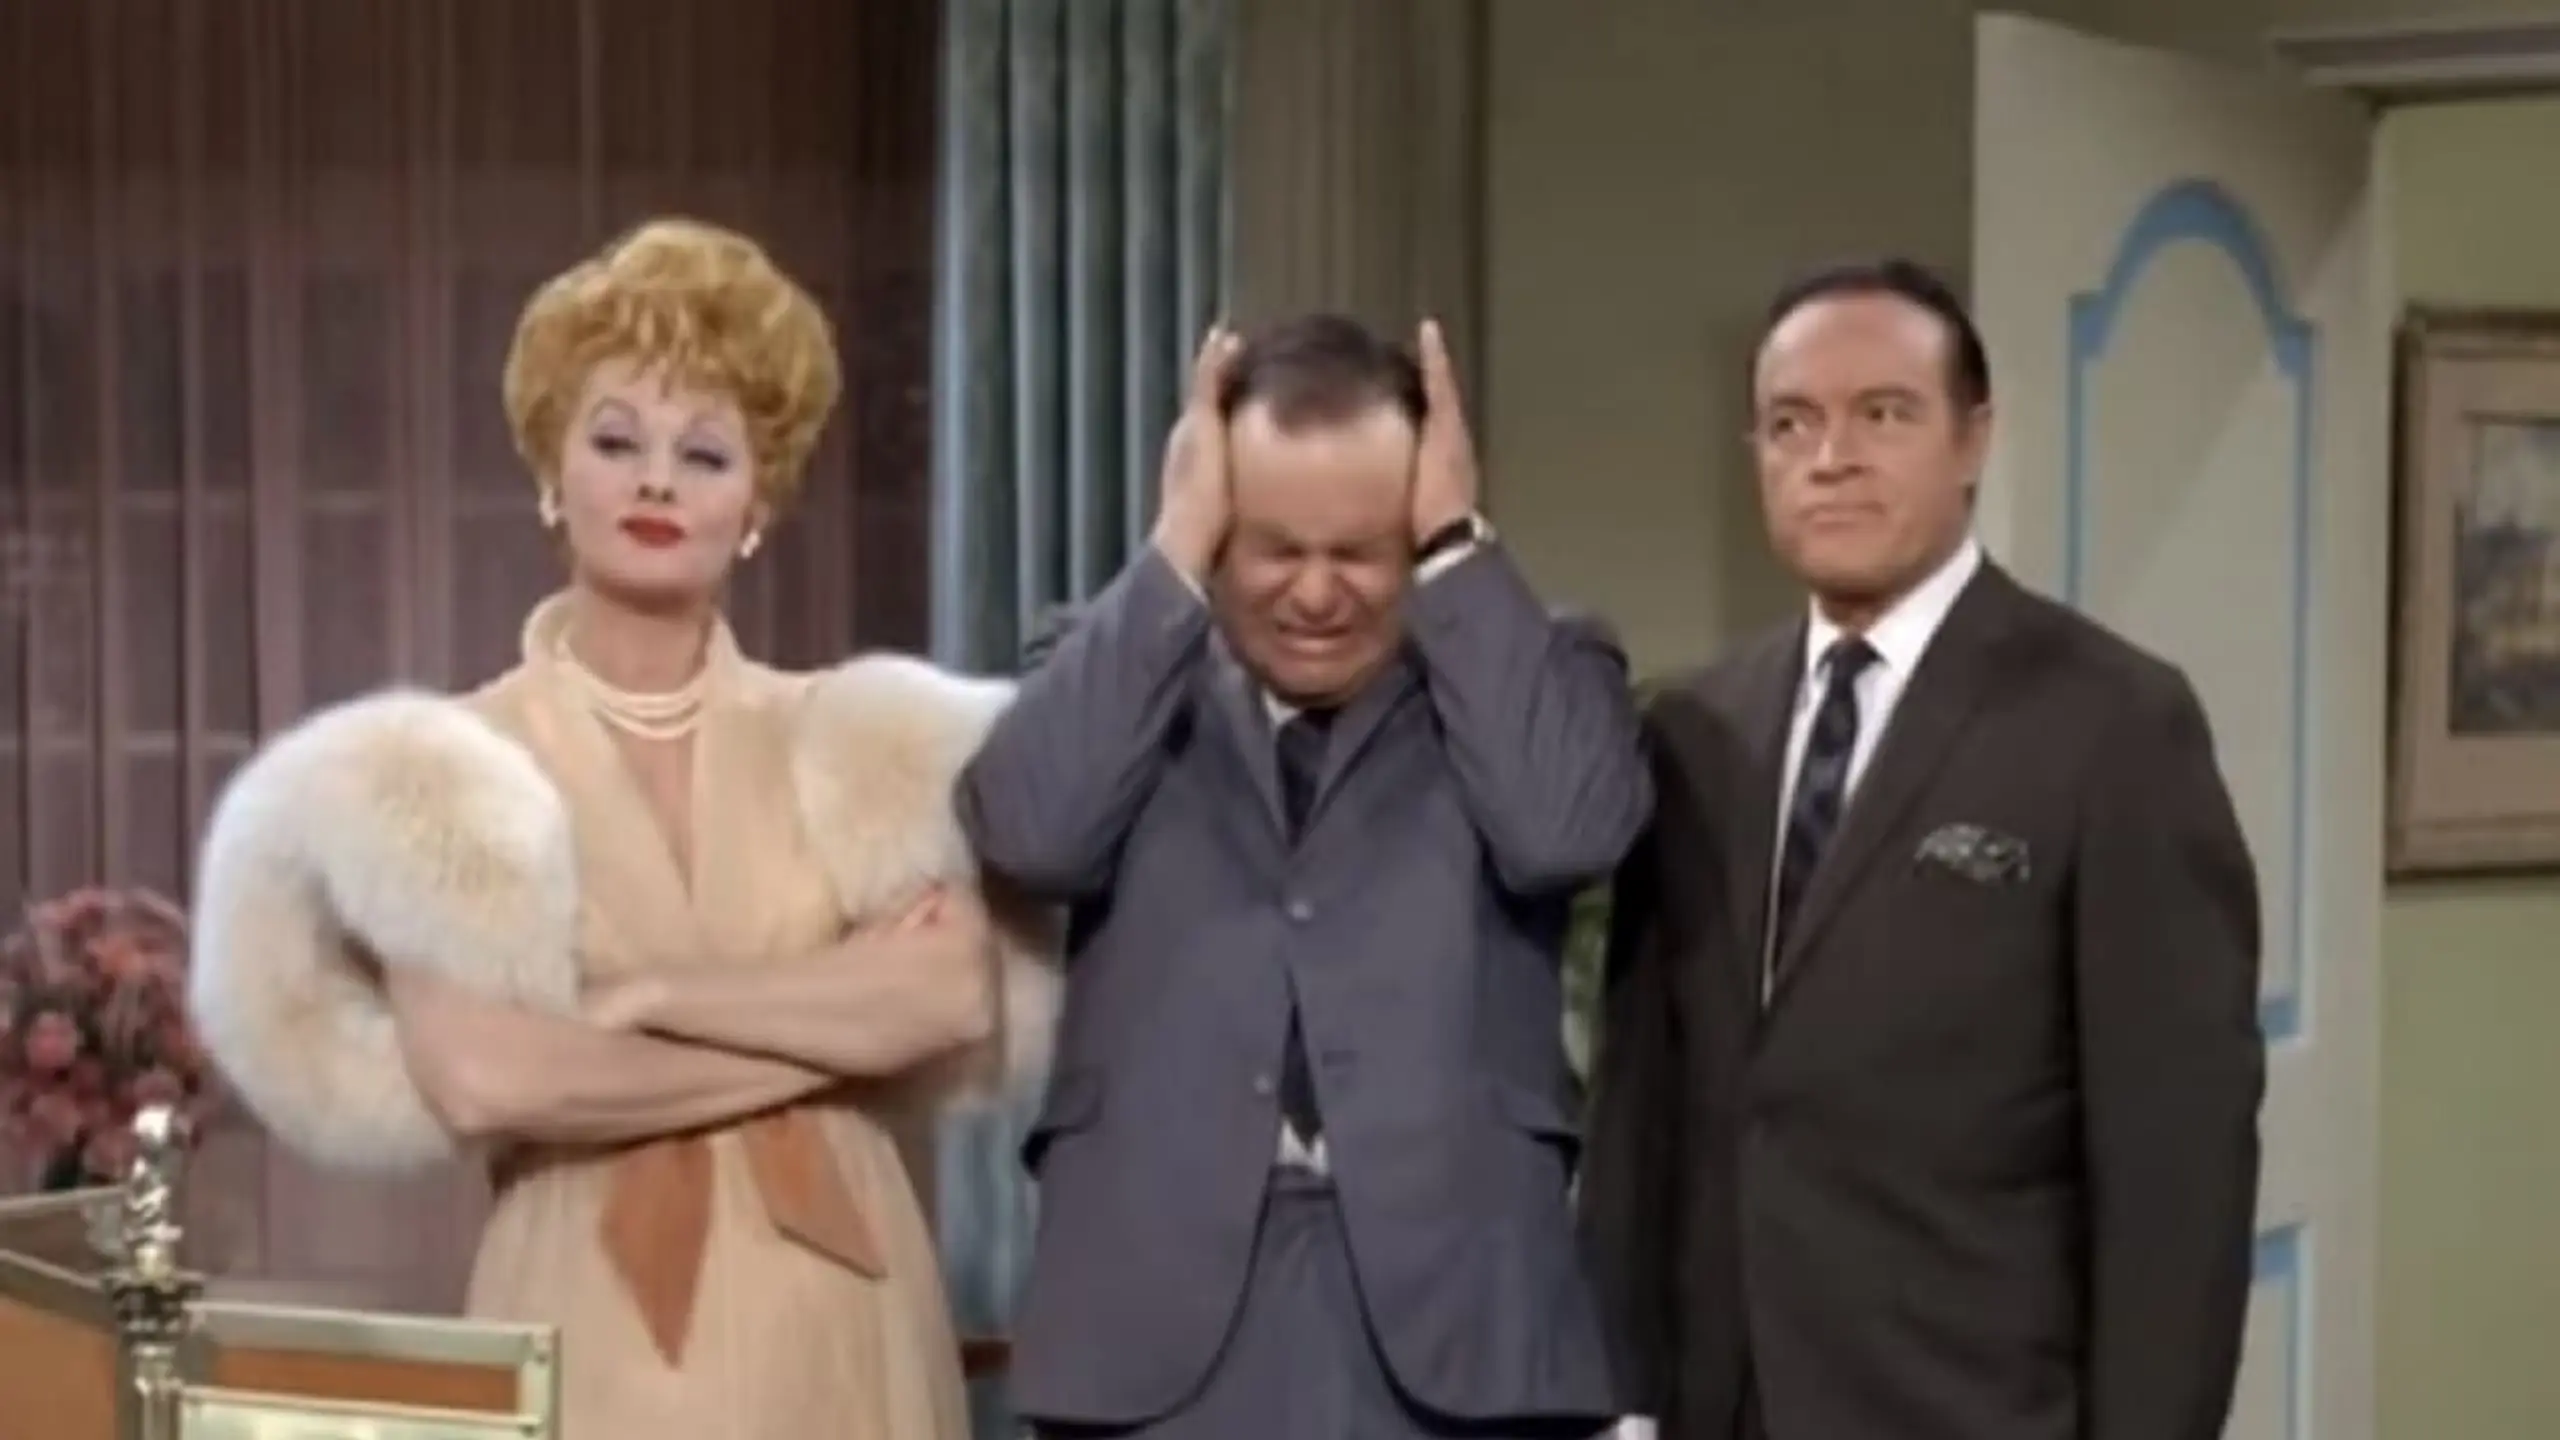 The Lucille Ball Comedy Hour